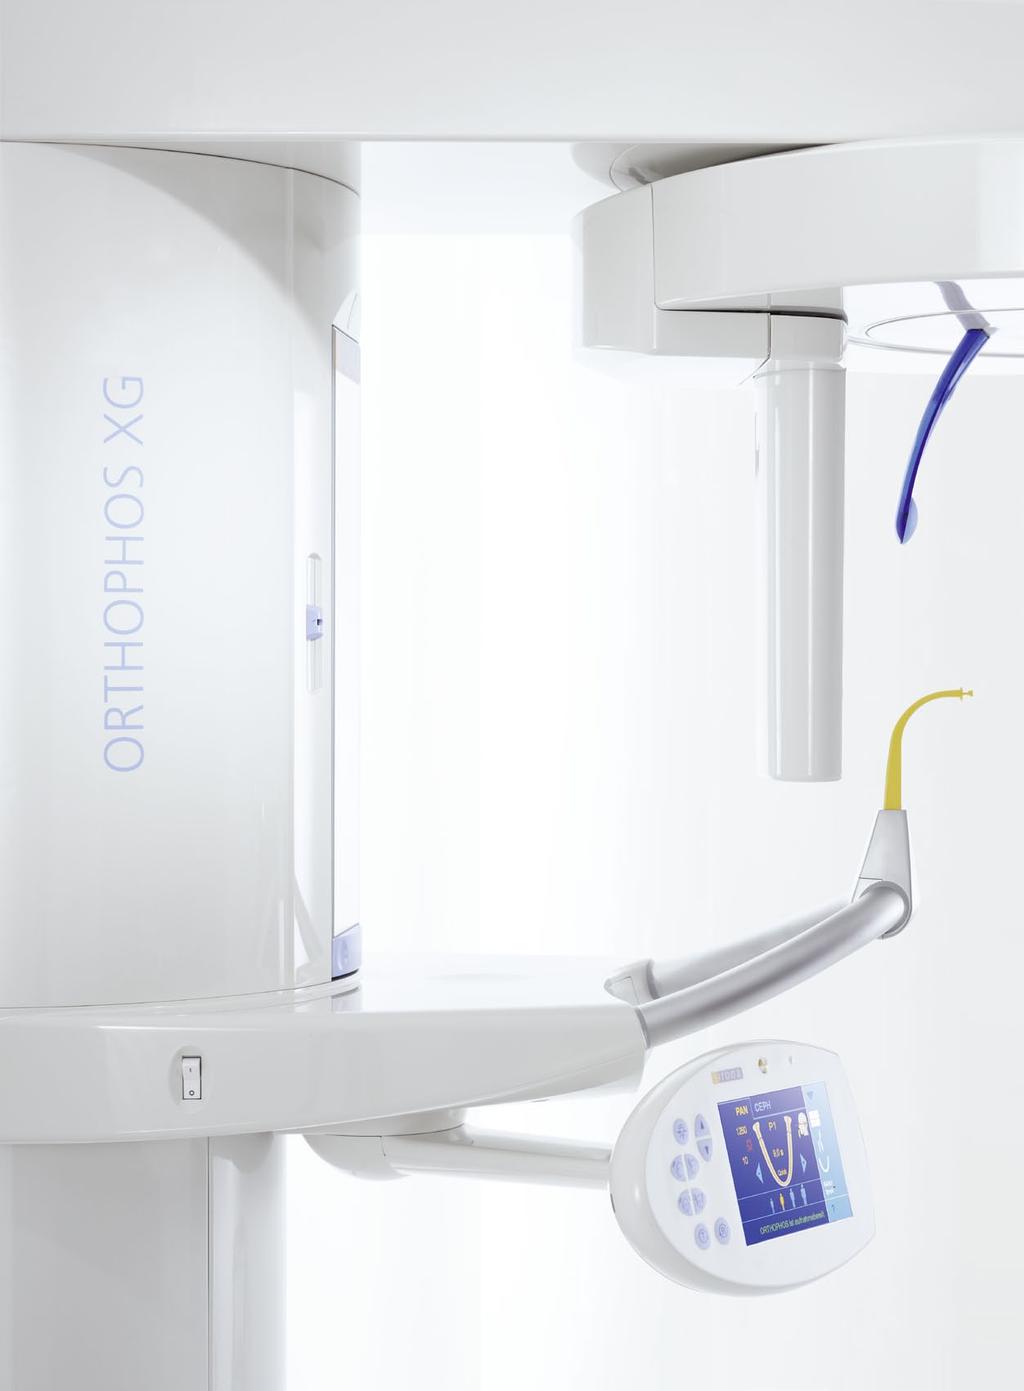 The 3D module increases diagnosis confidence in challenging cases and opens up new possibilities in implantology in connection with CEREC.